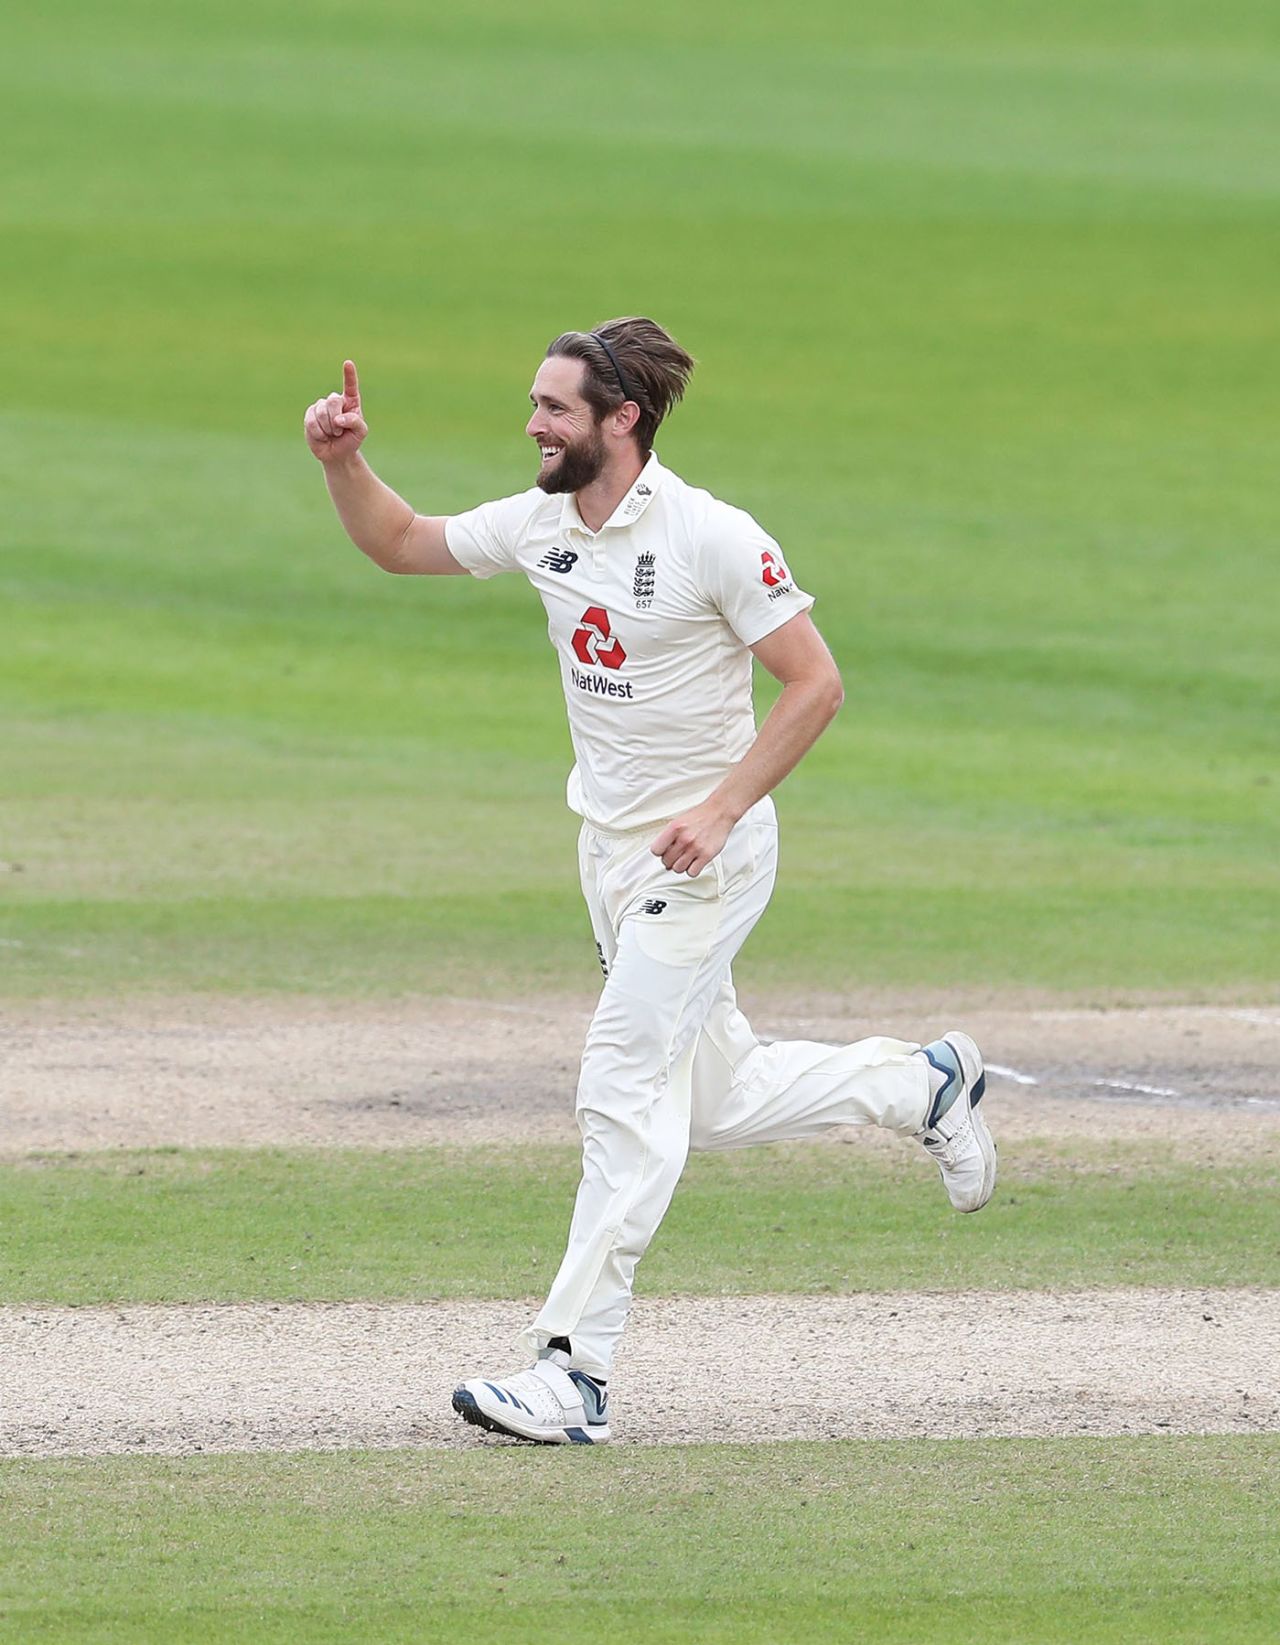 Chris Woakes relished his dismissal of Jermaine Blackwood, England v West Indies, 3rd Test, Emirates Old Trafford, 2nd day, July 25, 2020